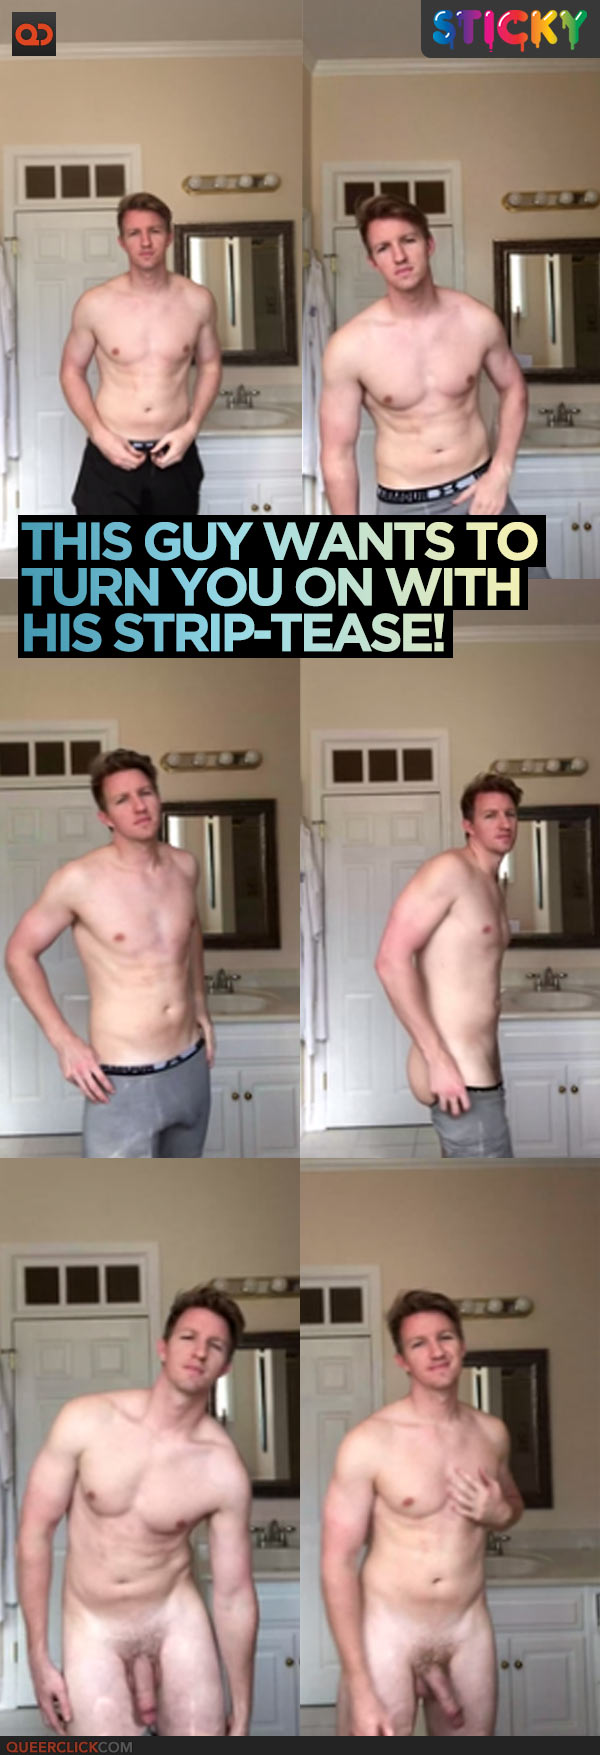 This Guy Wants To Turn You On With His Strip-Tease!